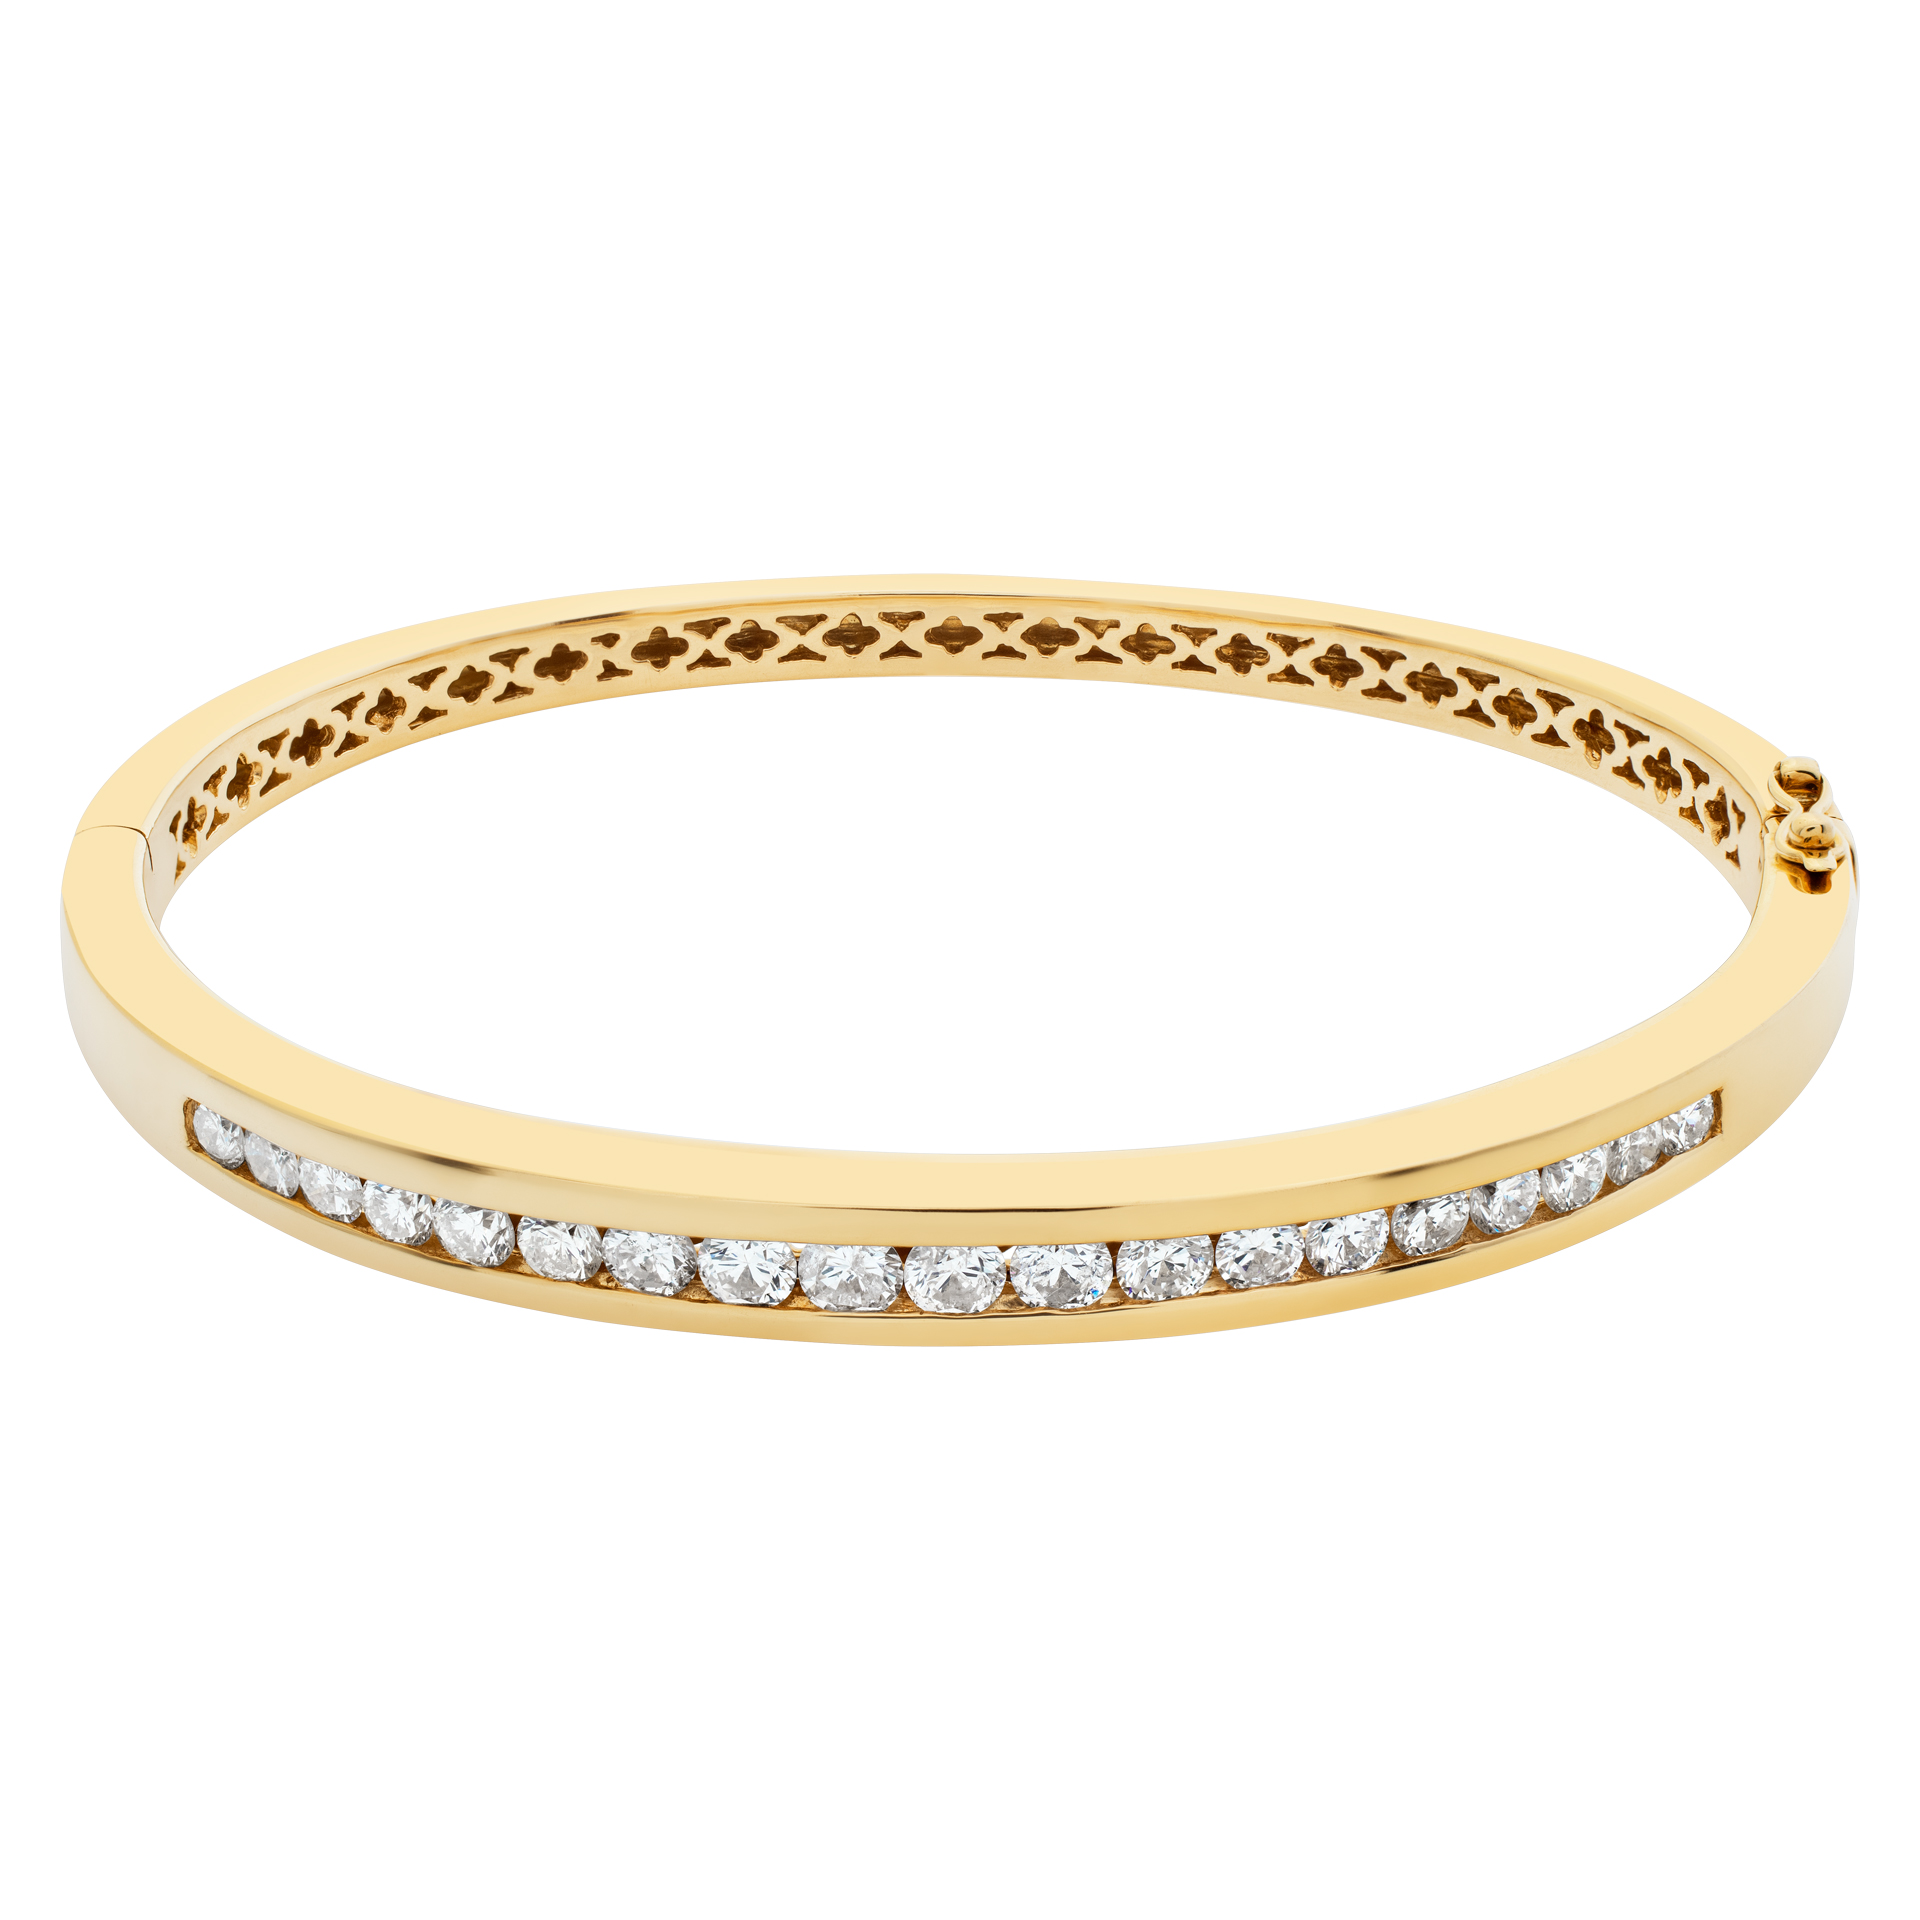 Diamond bangle in 14k yellow gold with approximately 2.5 carats in diamonds.